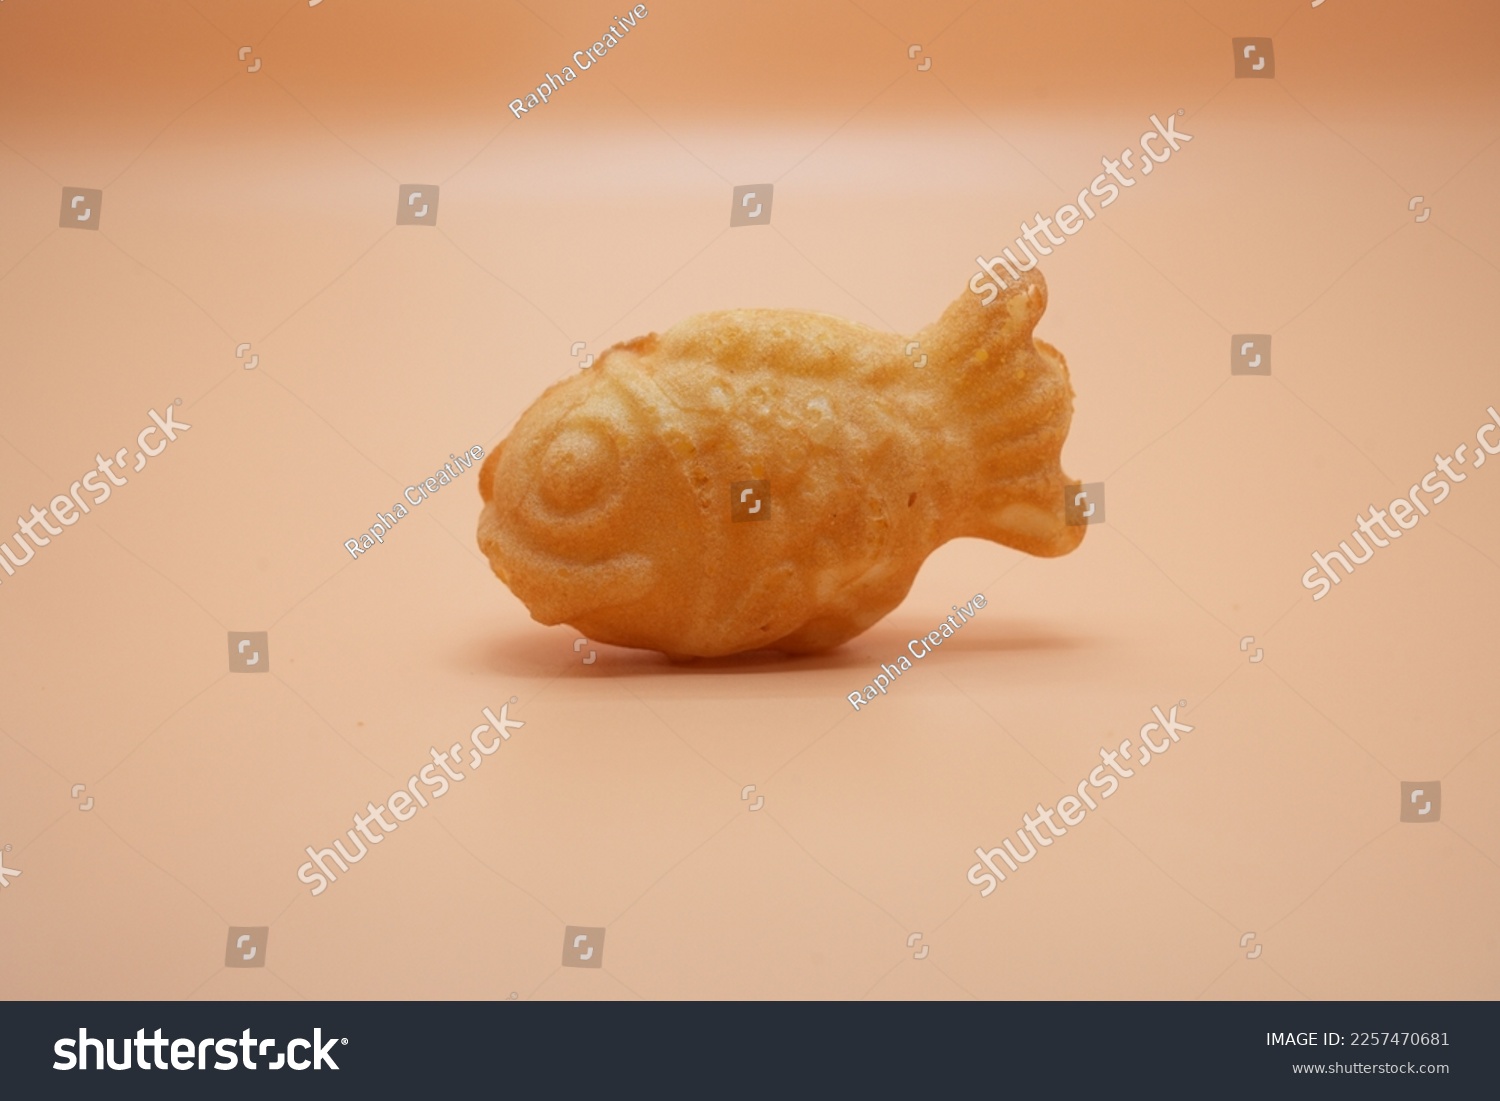 Delicious image as a bread with a home-style crucian carp shape #2257470681